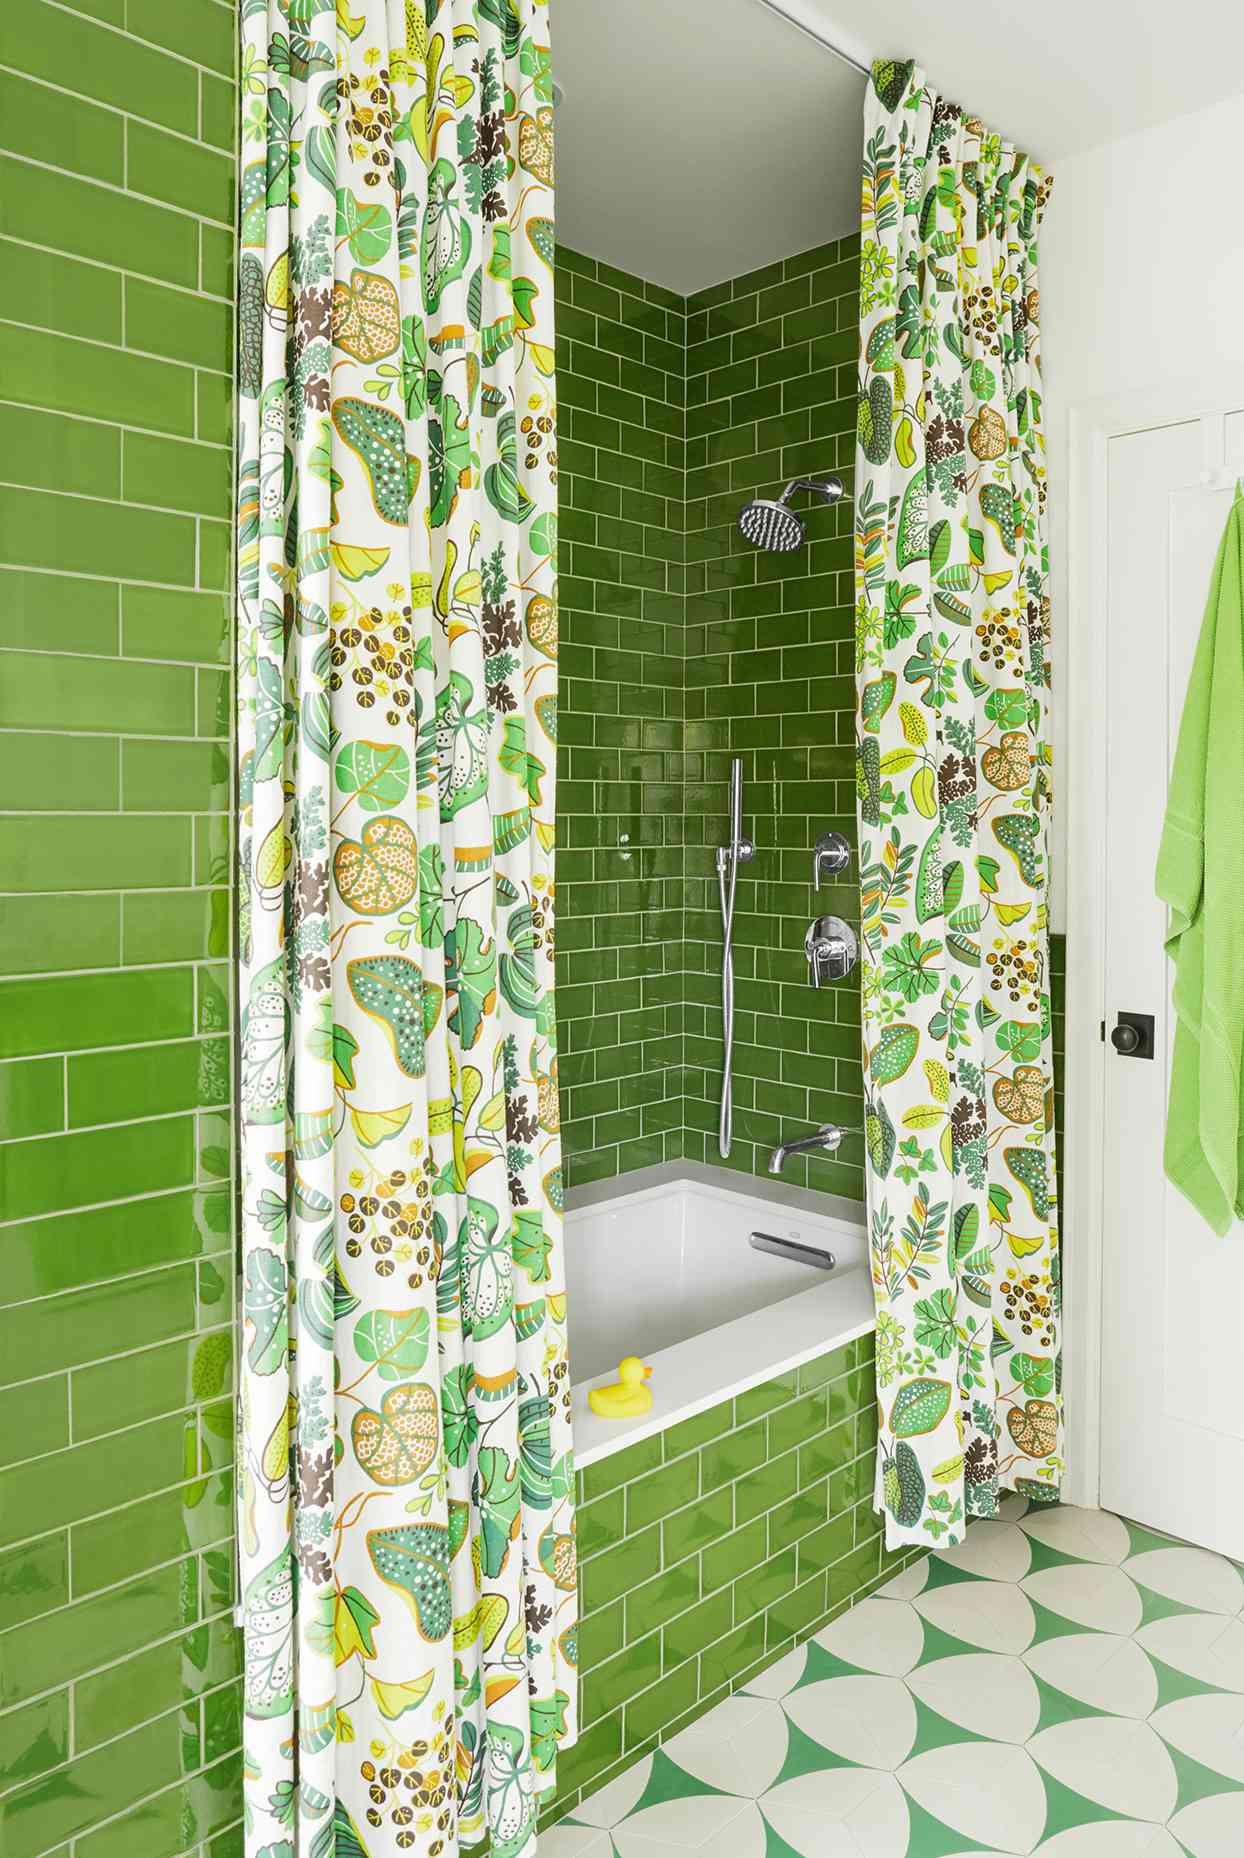 Mixing Patterns in a Small Bathroom